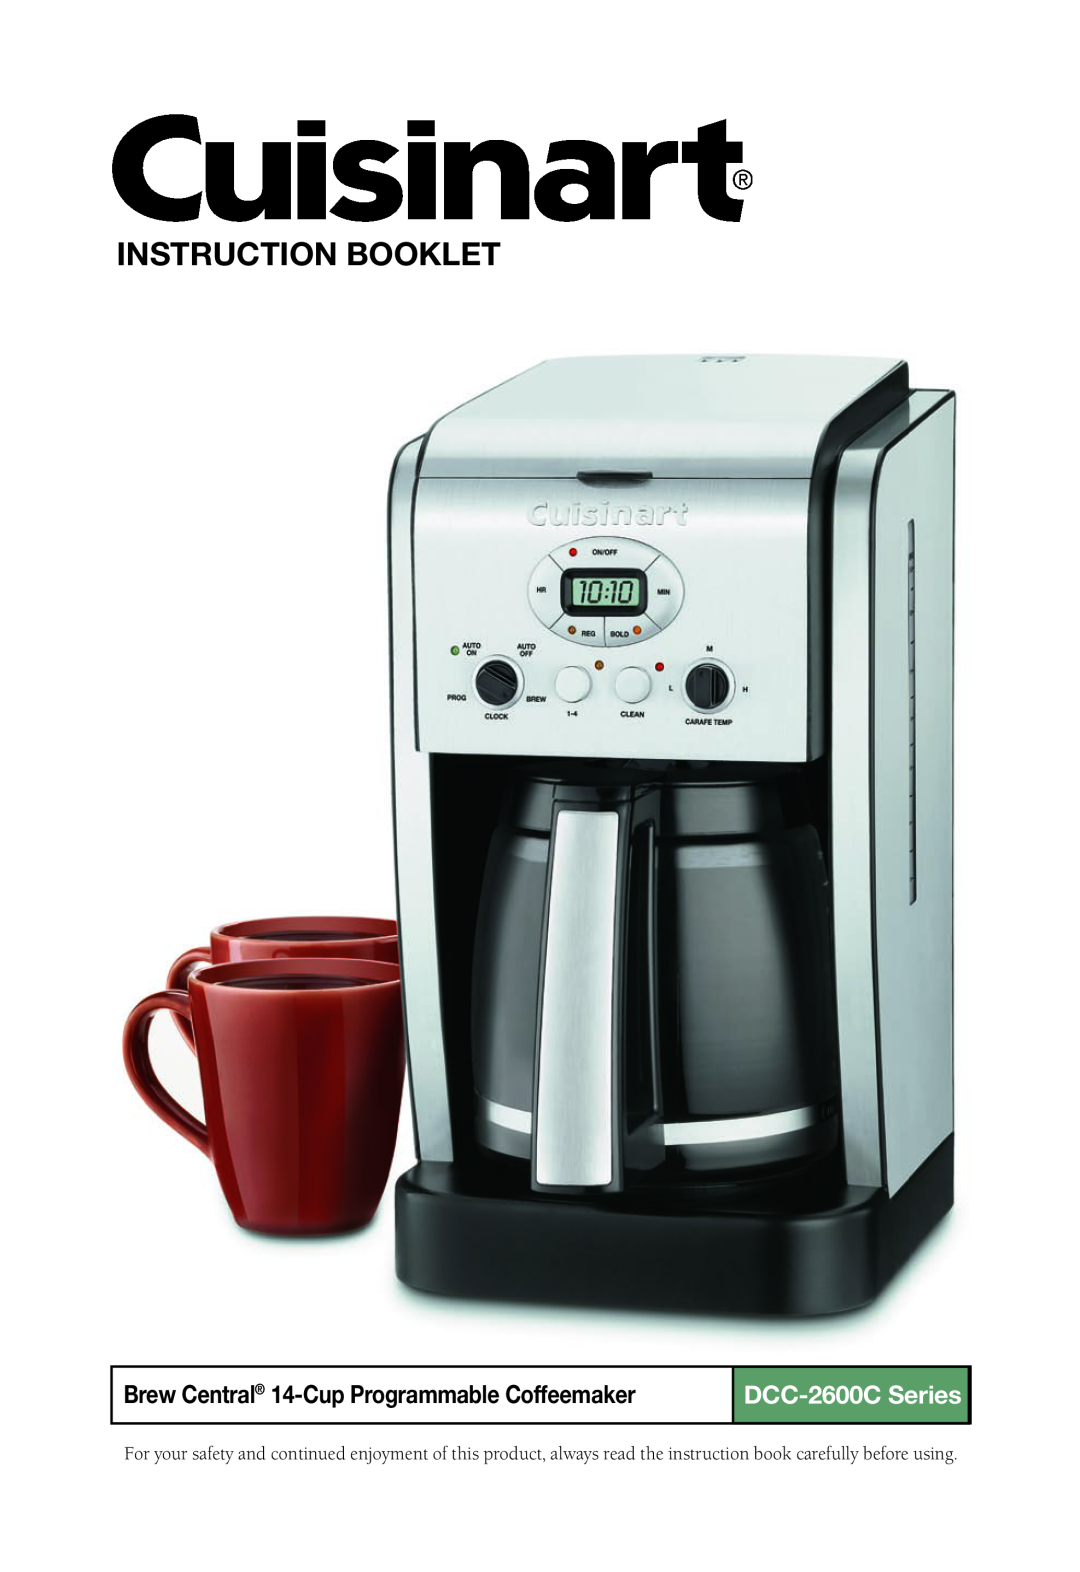 Cuisinart manual Instruction Booklet, Brew Central 14-Cup Programmable Coffeemaker, DCC-2600C Series 